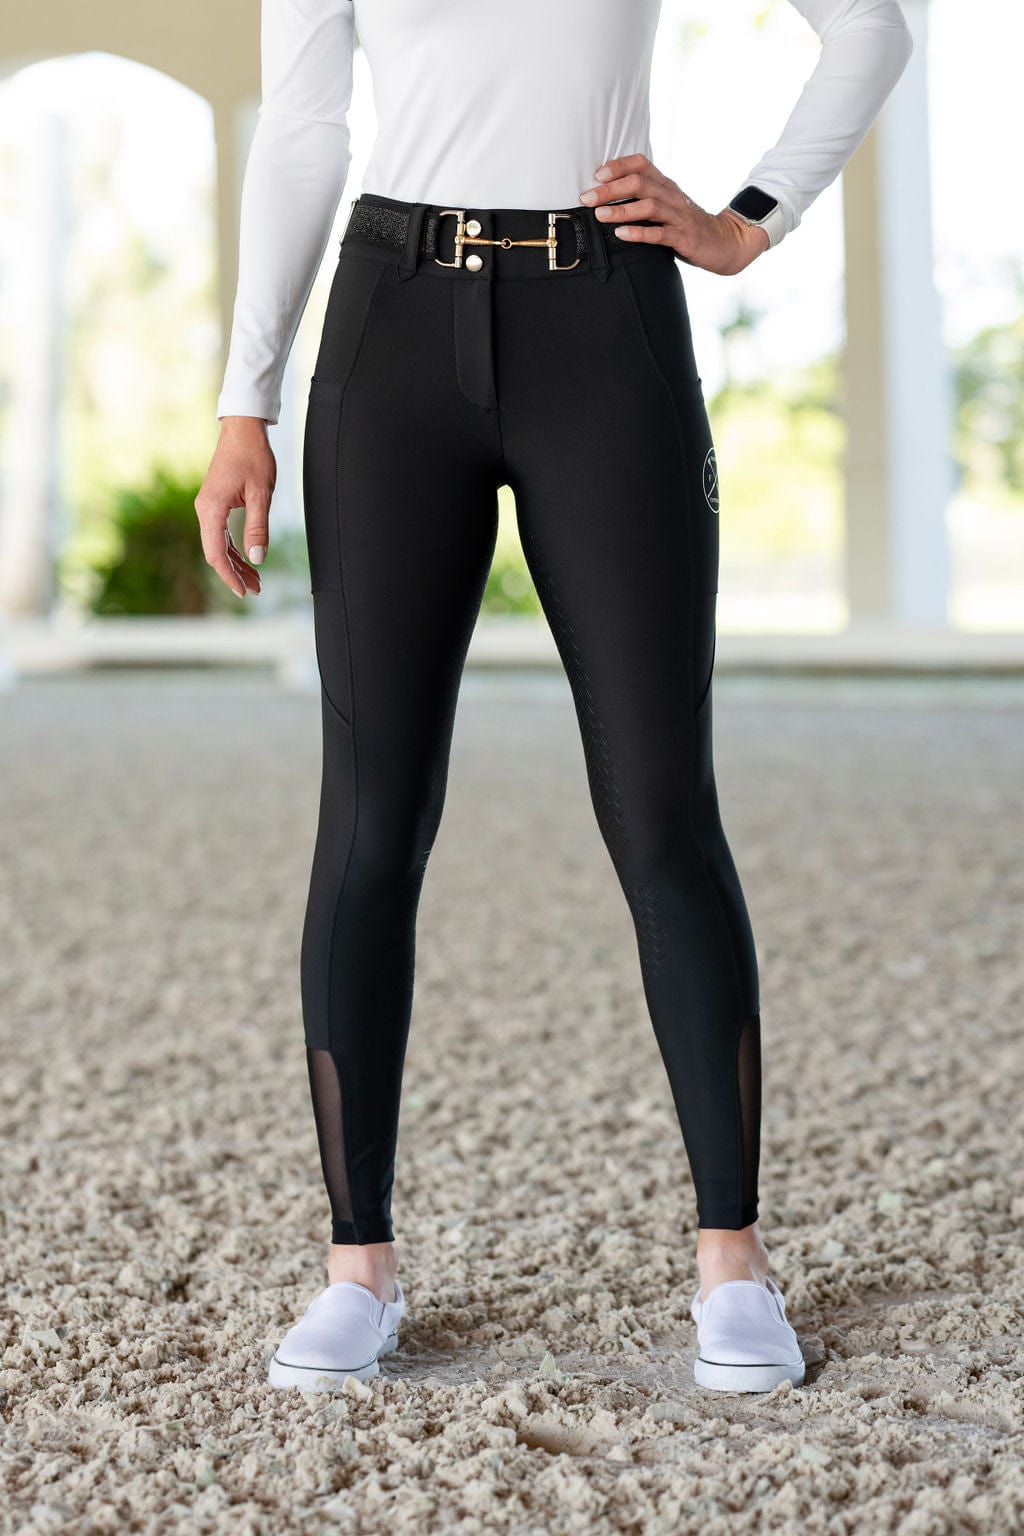 Best Black Lux Breech  Free Ride designs high quality apparel and  horsewear.